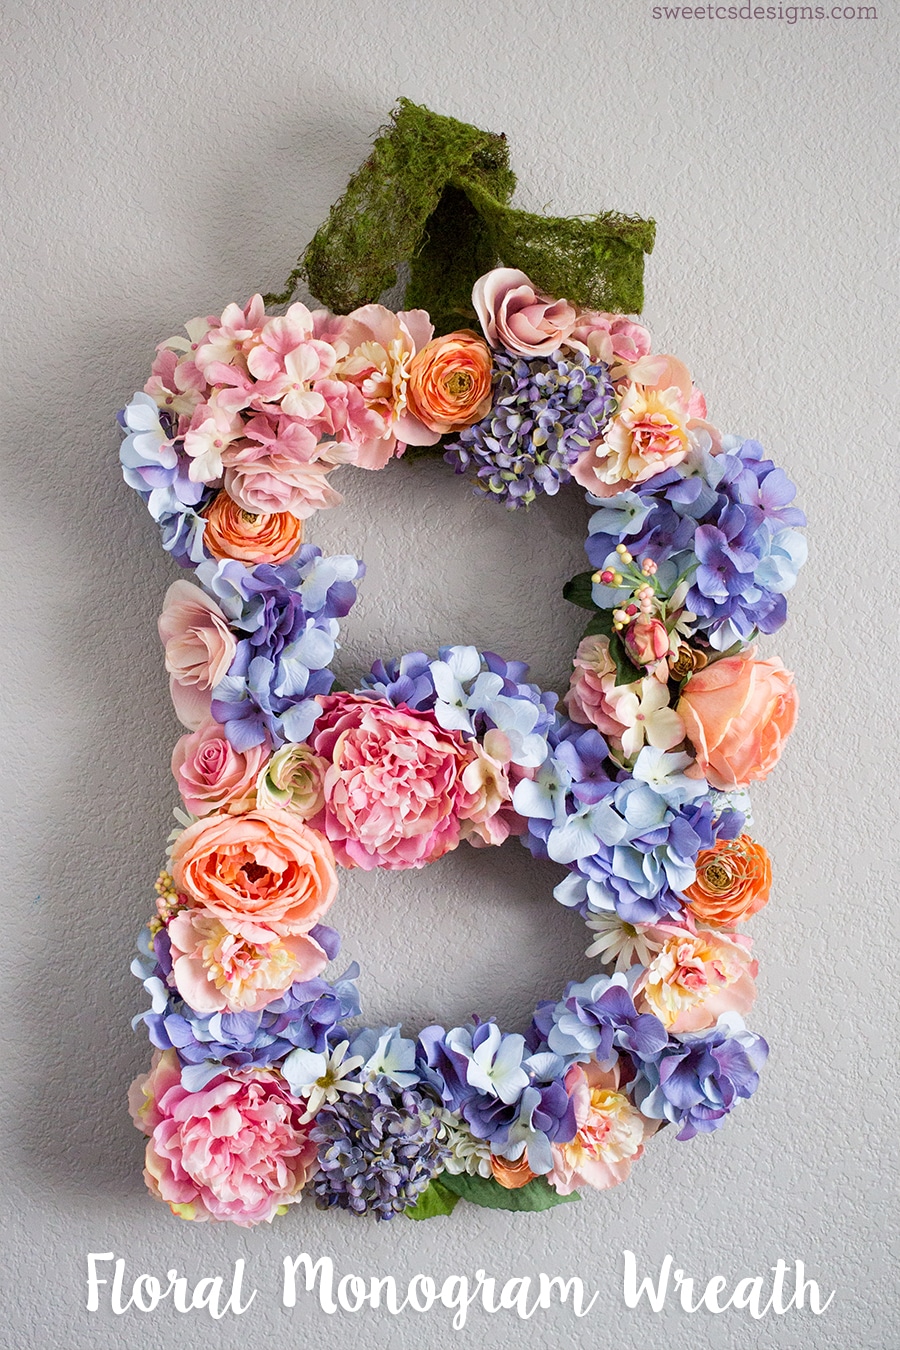 This beautiful floral monogram wreath is quick and easy to make!